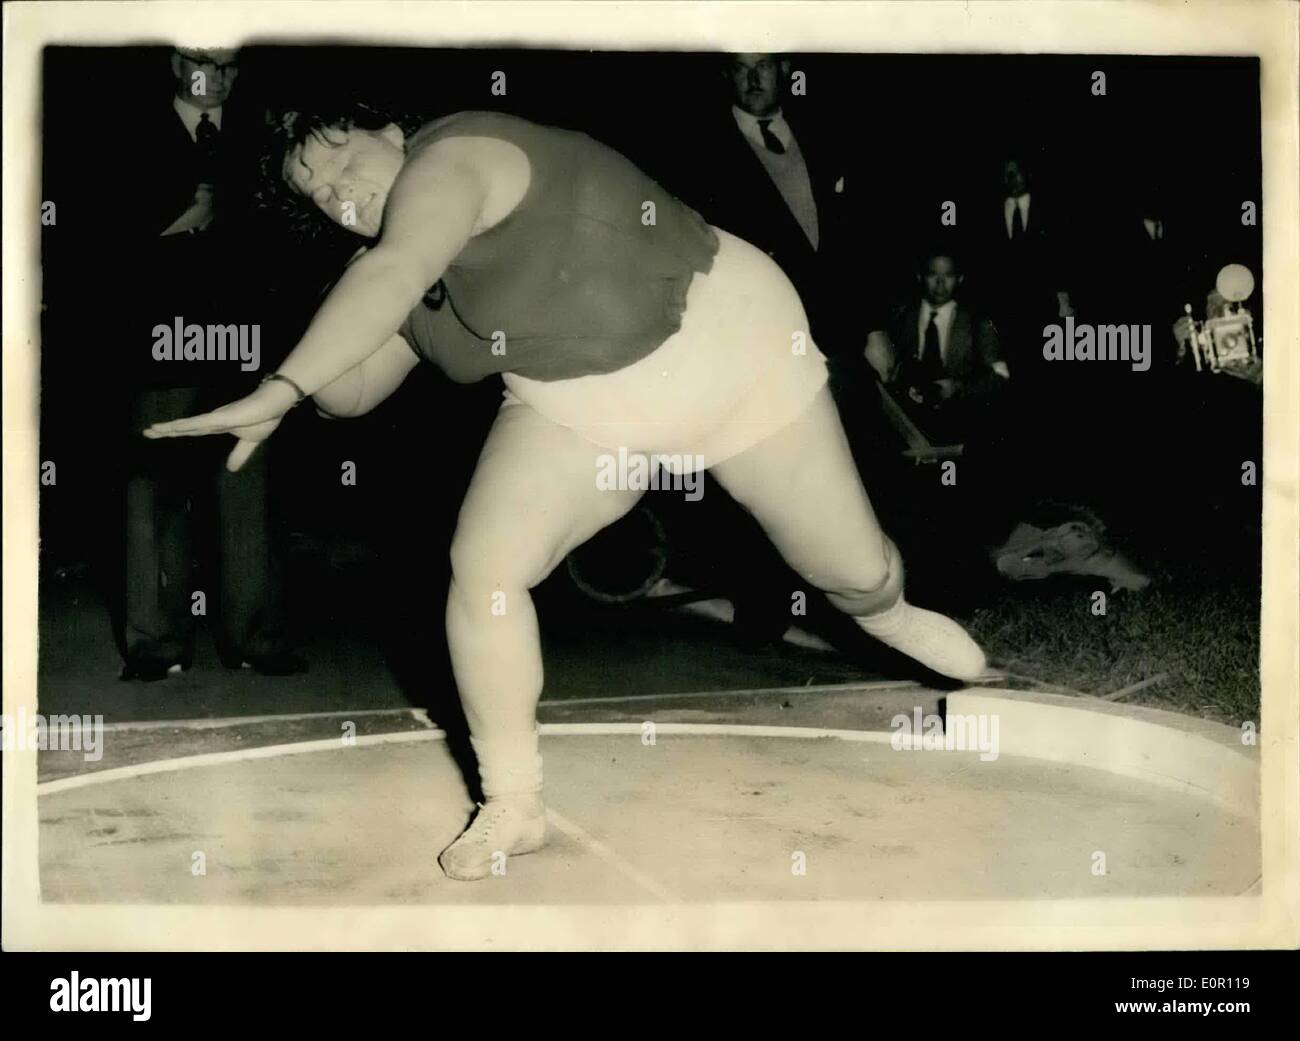 Aug. 08, 1957 - Britain Versus Russia Athletics At London's White City Stadium. Photo shows: Tamara Tyshkevitch, the 16-stone Russian woman weight putter, competing in the putting the weight event this evening. Stock Photo